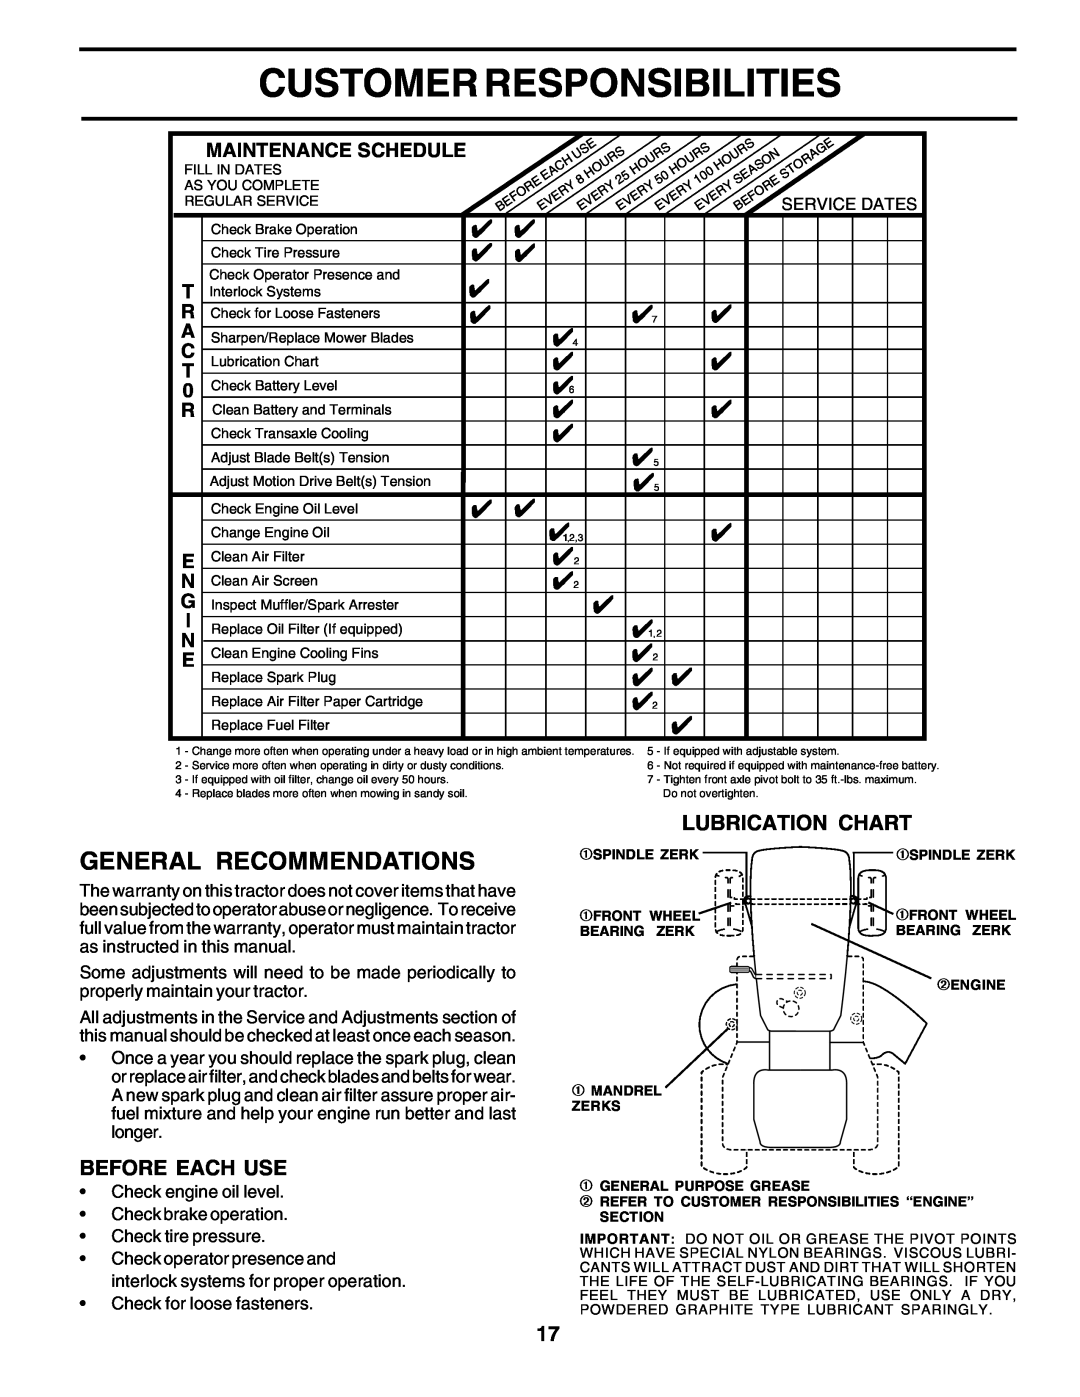 Poulan 180200 Customer Responsibilities, General Recommendations, Lubrication Chart, Before Each Use, Maintenance Schedule 